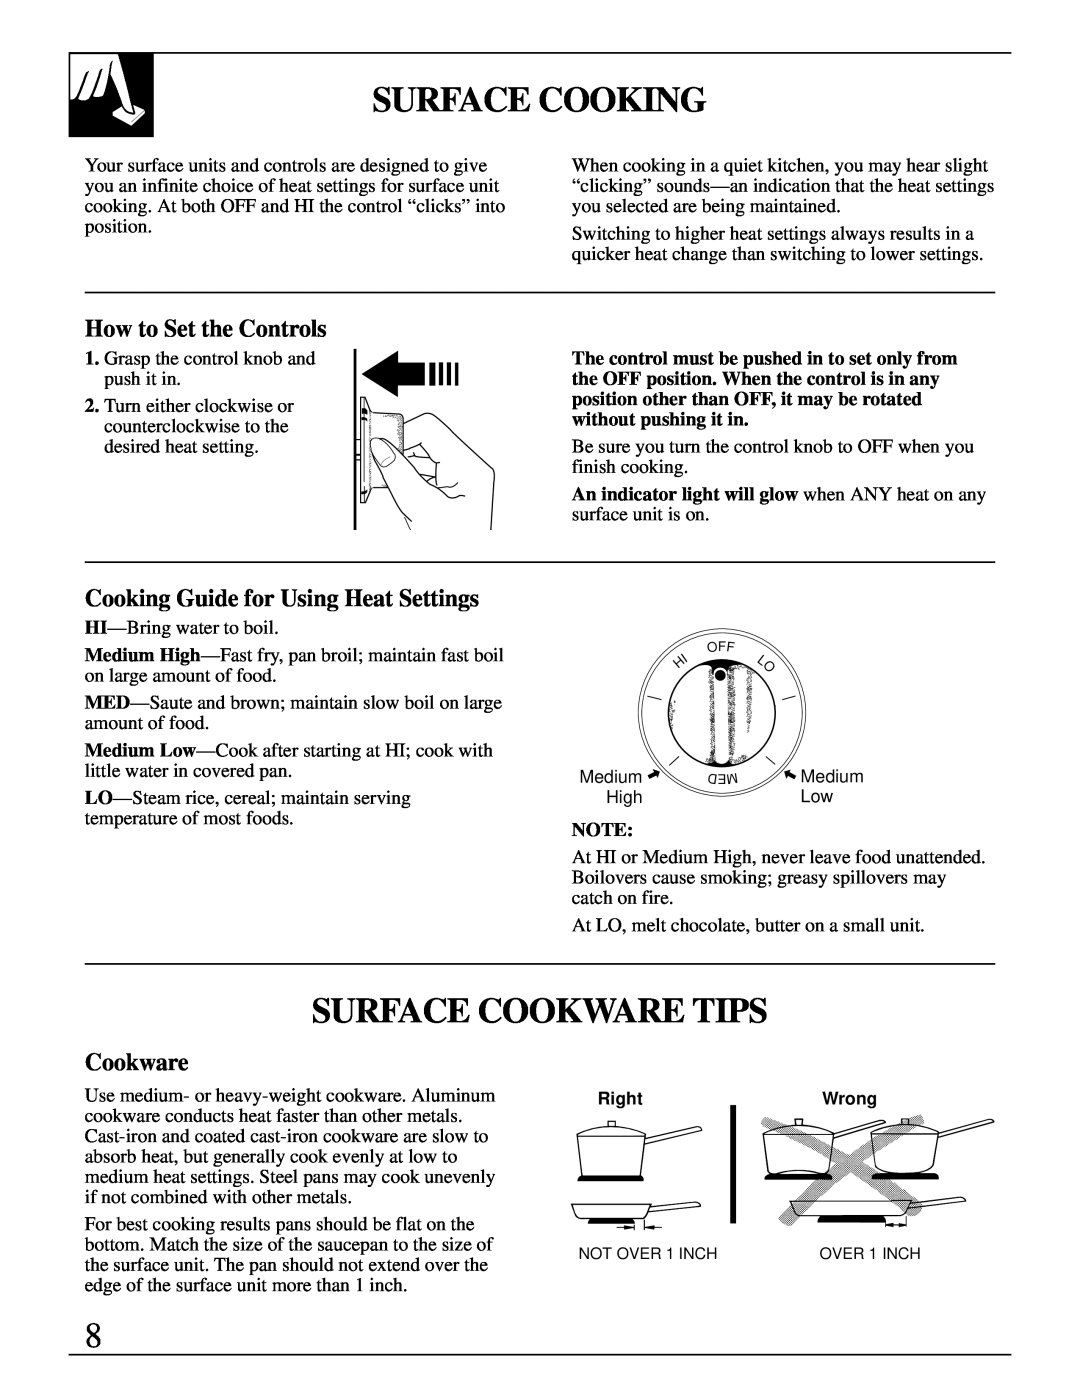 GE JDP37, JDP36 Surface Cooking, Surface Cookware Tips, How to Set the Controls, Cooking Guide for Using Heat Settings 